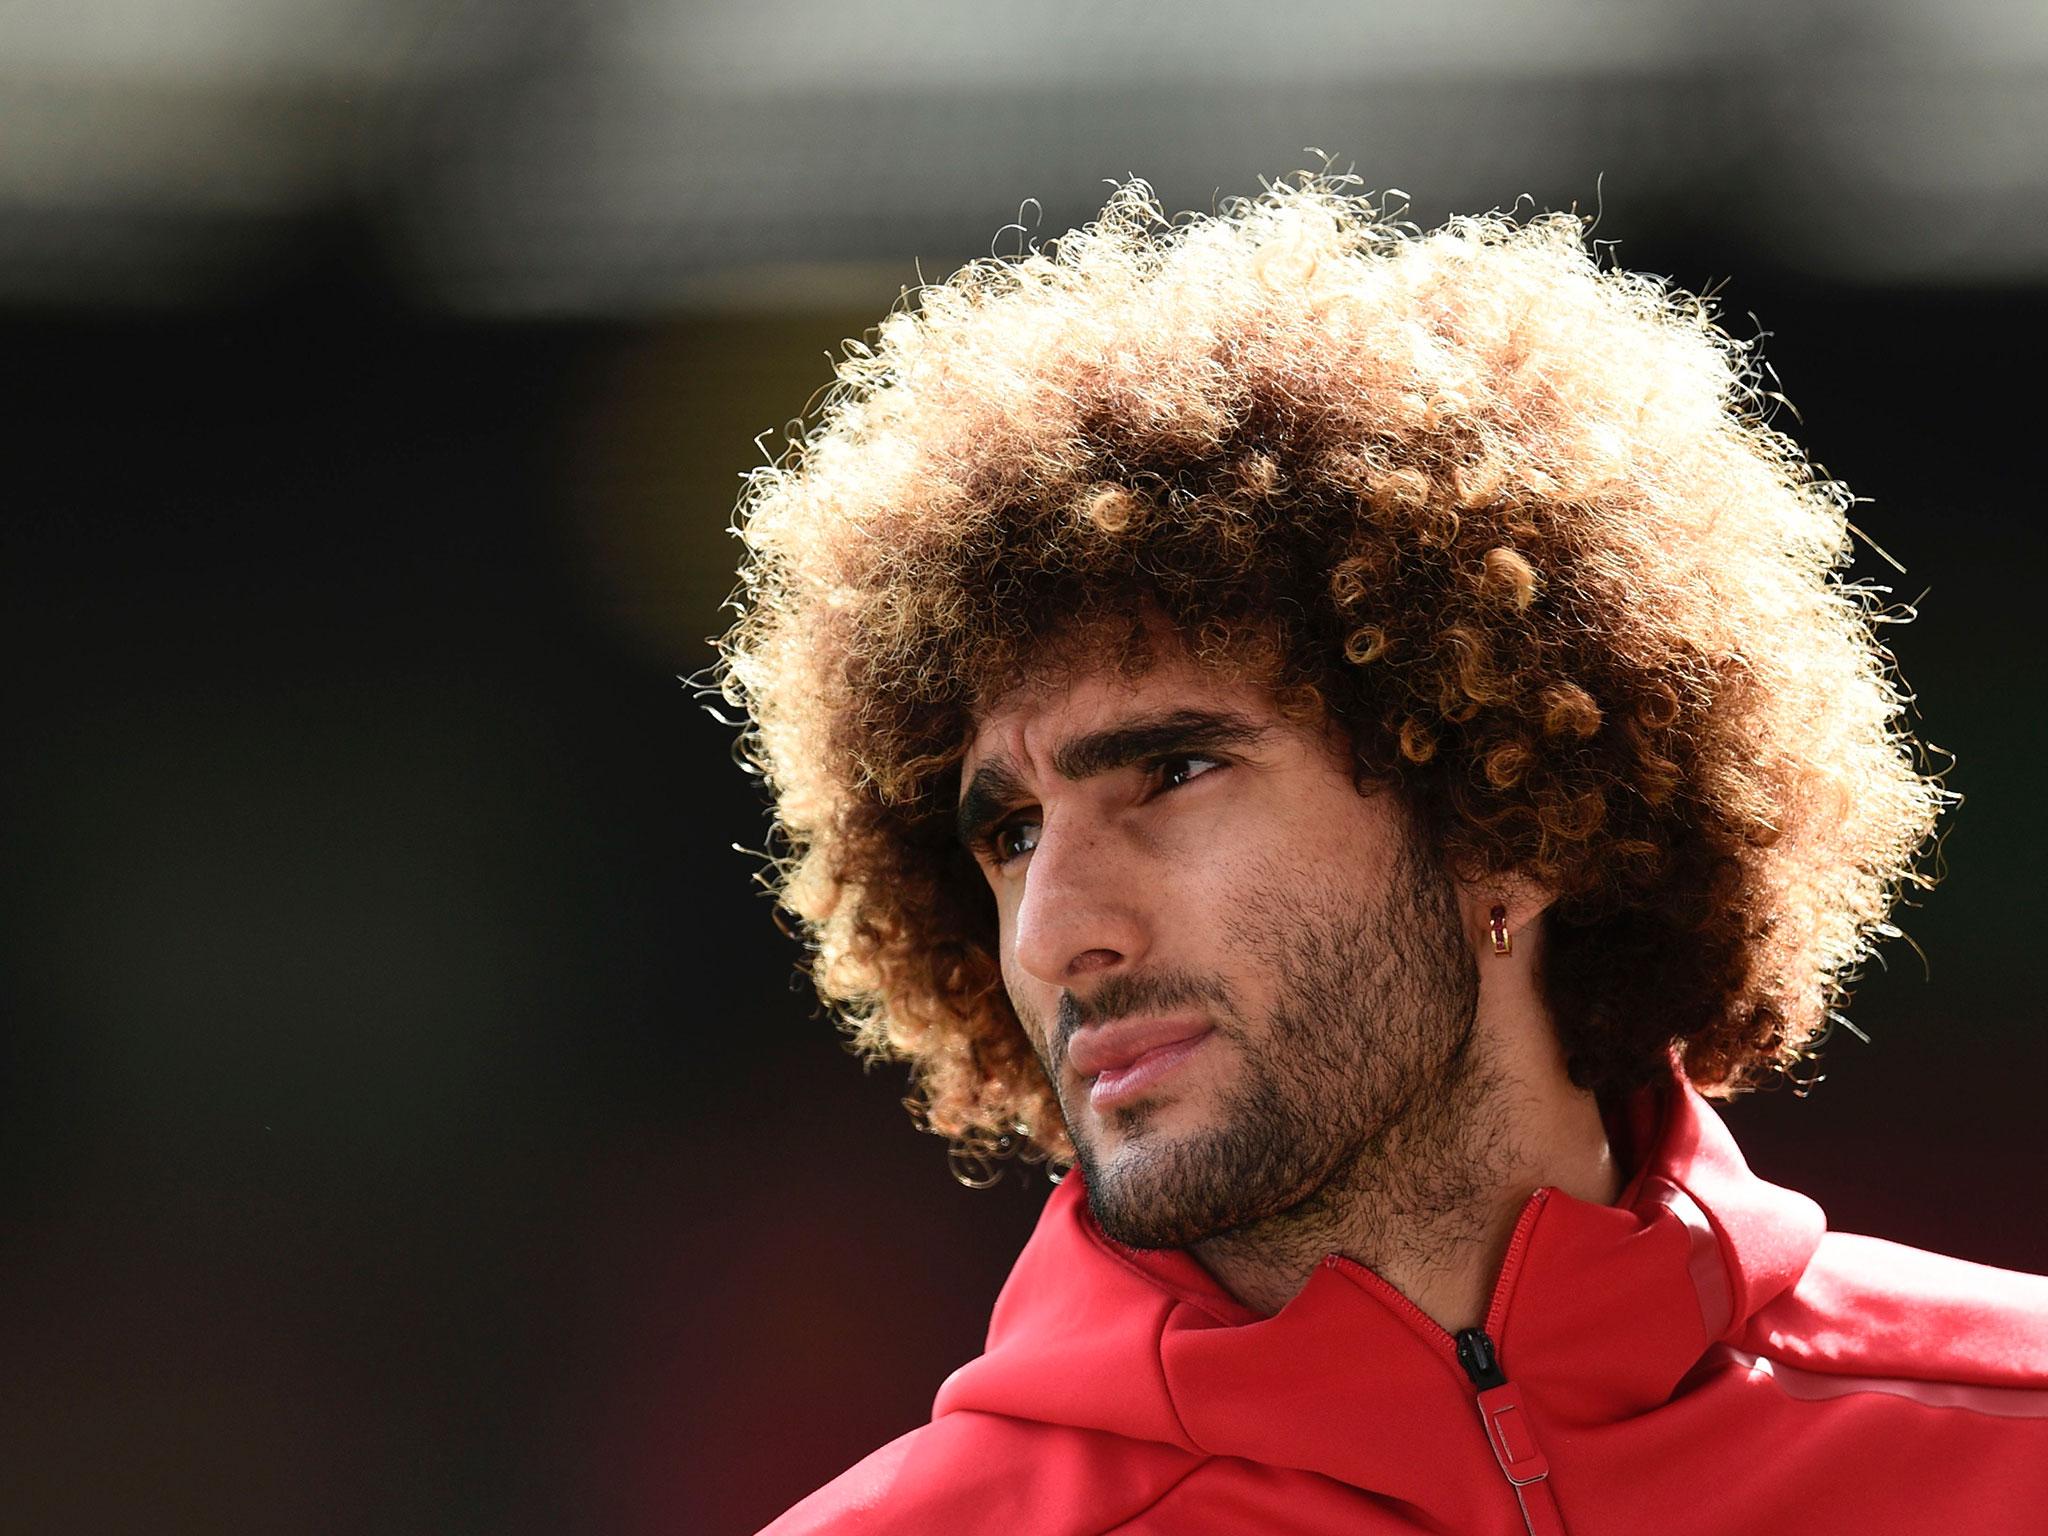 Marouane Fellaini knows United must improve their form at Old Trafford